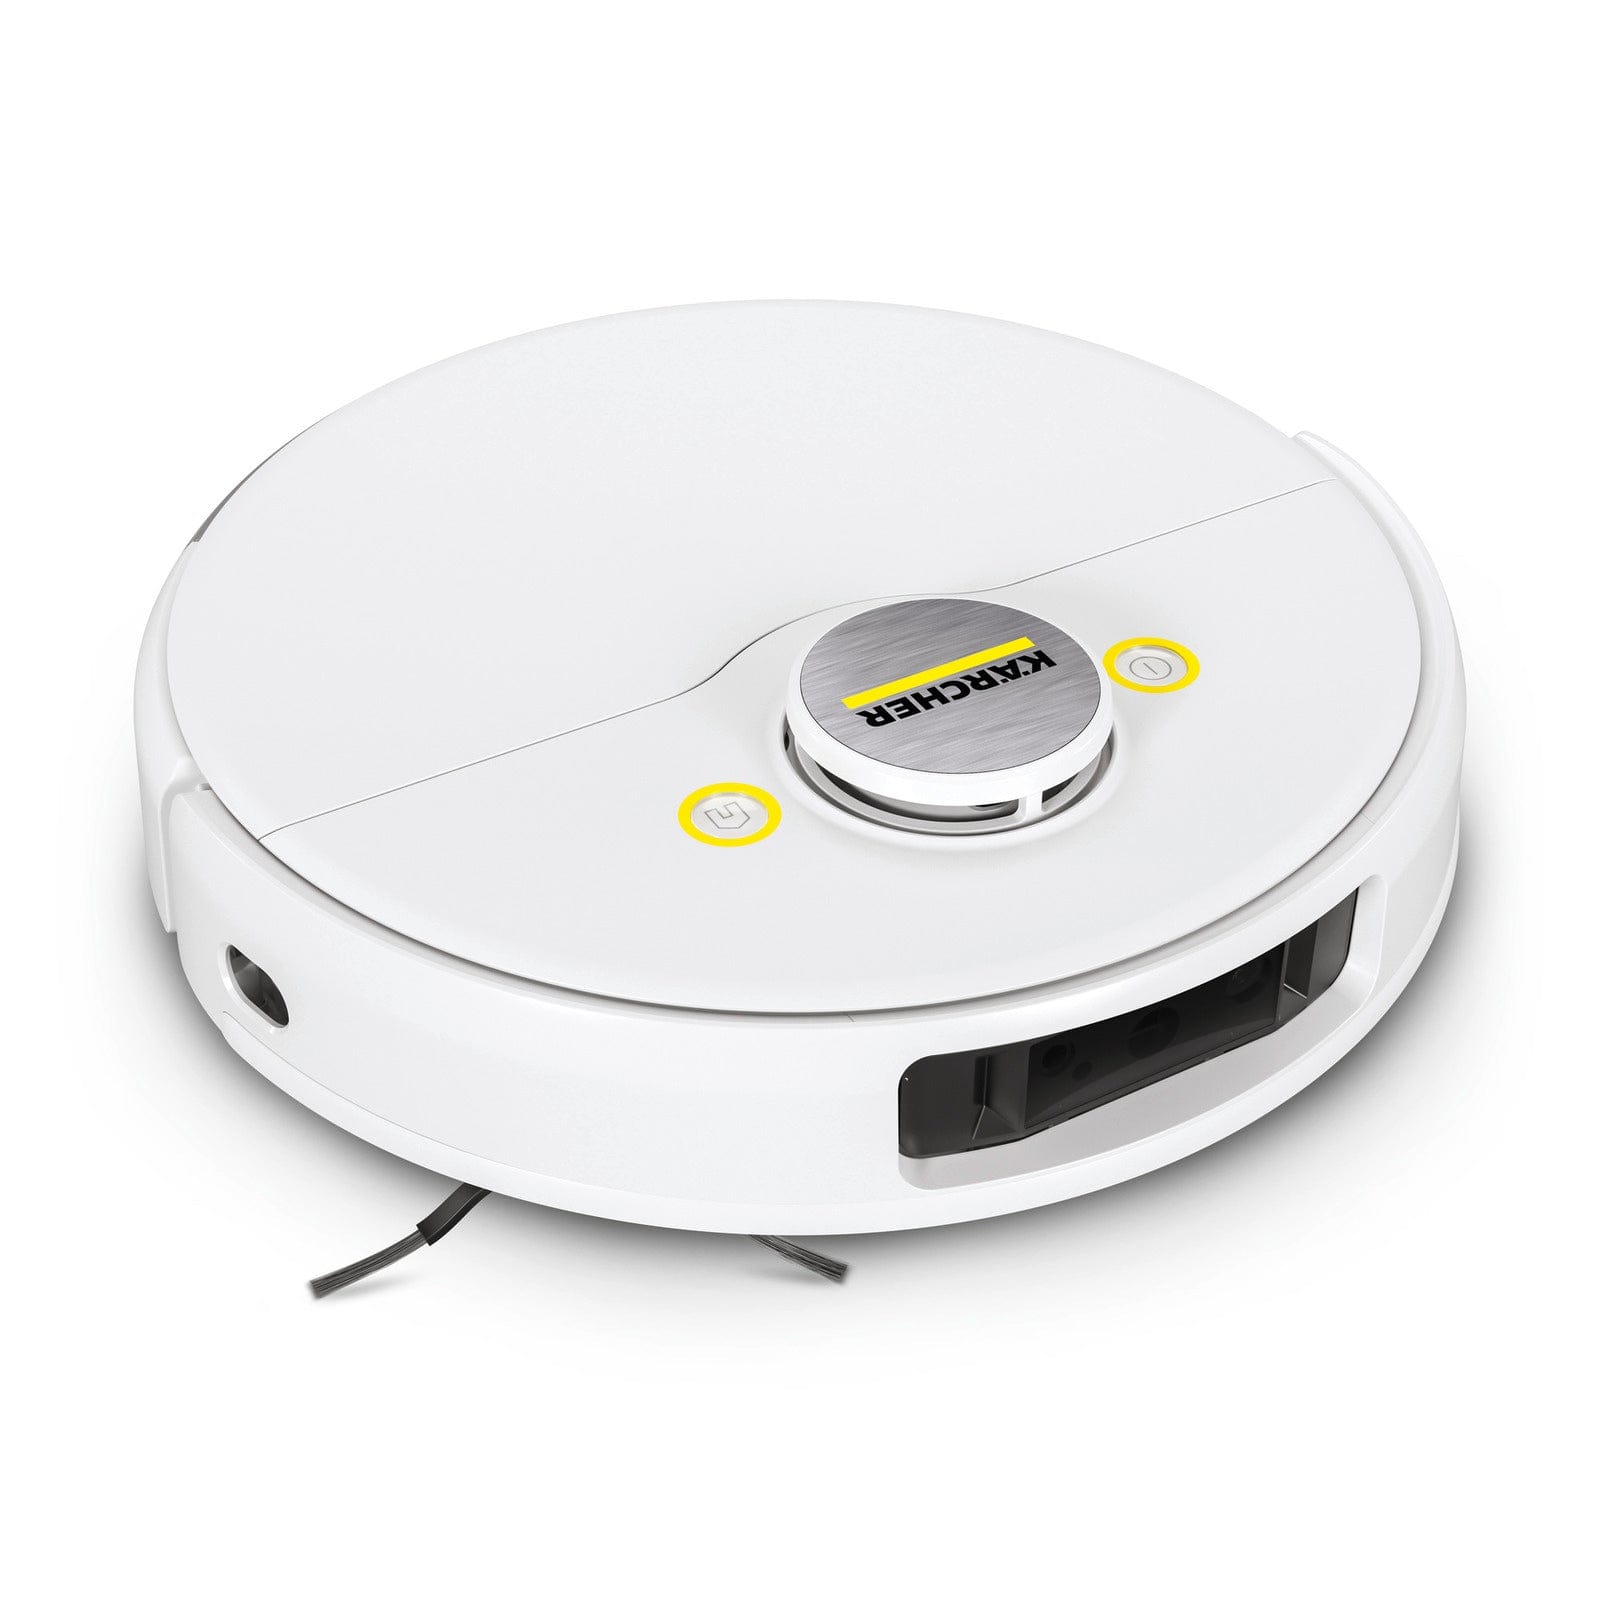 Karcher Robot Vacuum Cleaner with Wiping Function RCV 3 | Supply Master Accra, Ghana Steam & Vacuum Cleaner Buy Tools hardware Building materials